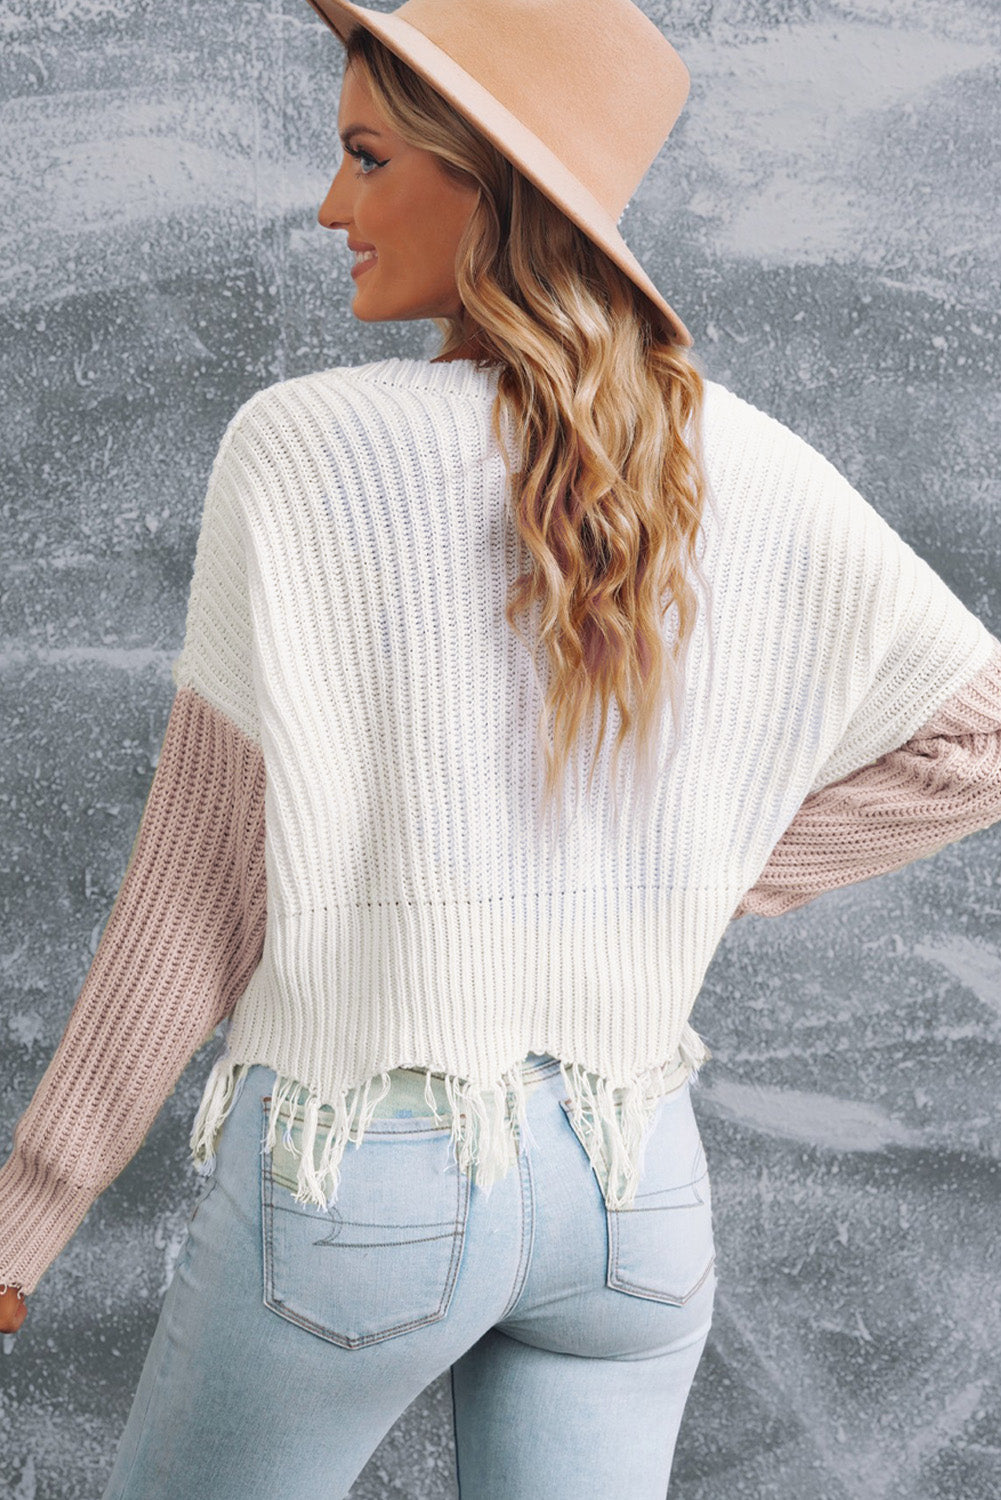 Gray Hollow-out Distressed Tassels Sweater